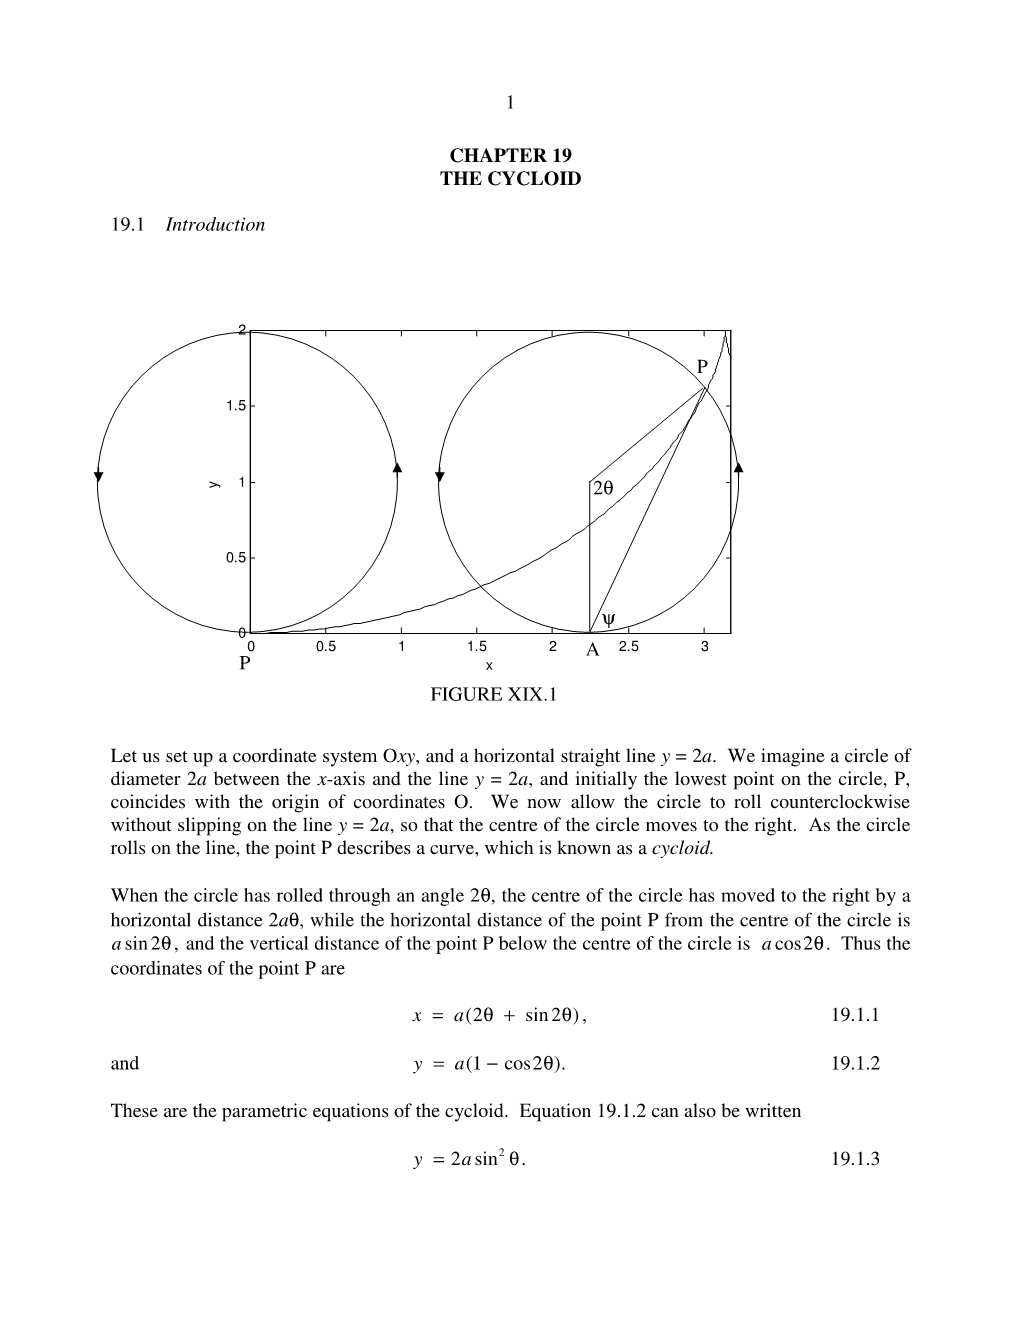 1 CHAPTER 19 the CYCLOID 19.1 Introduction Let Us Set up A